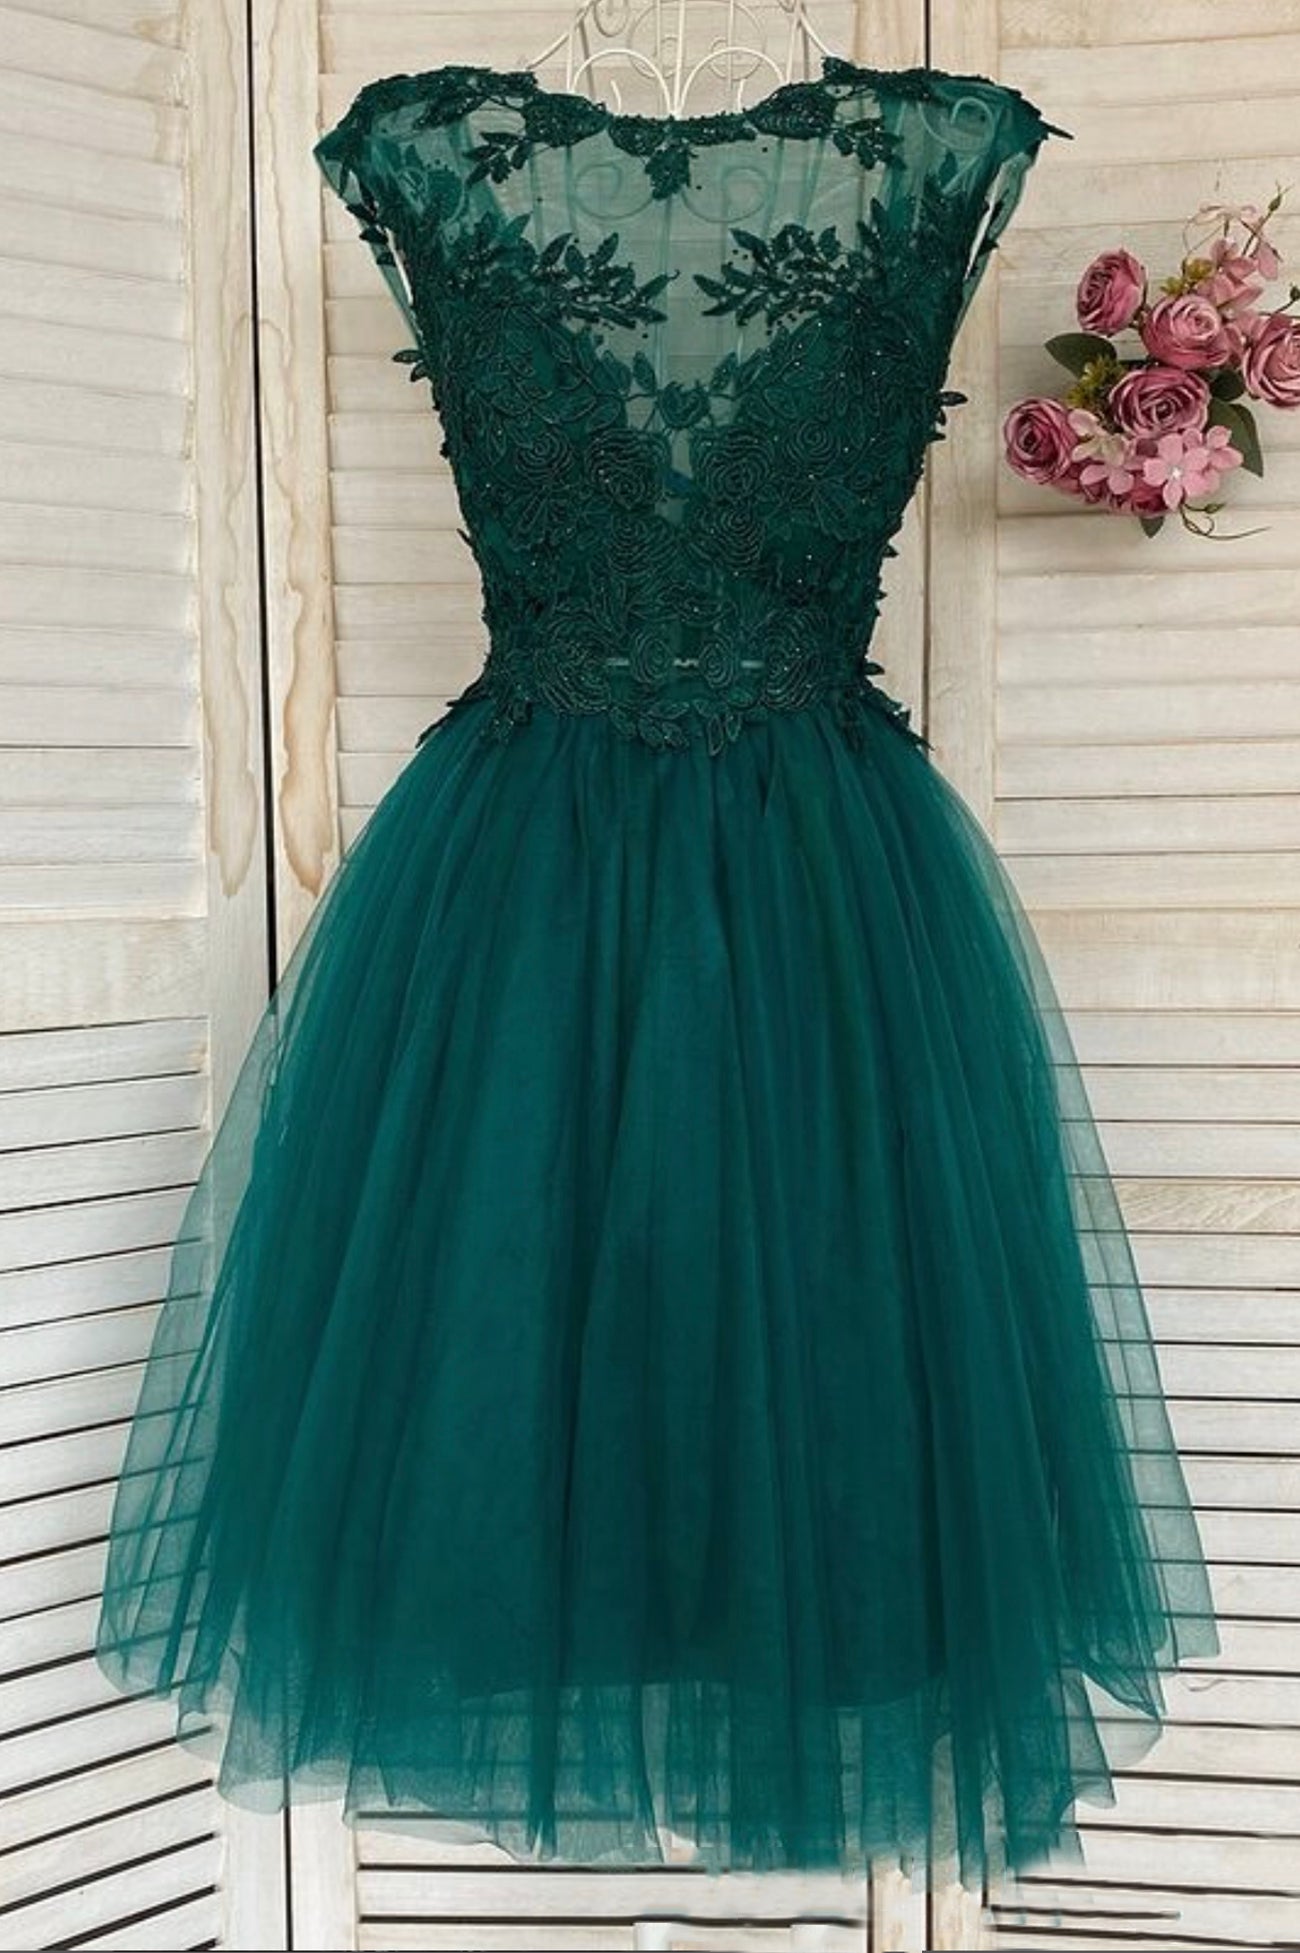 Green Lace Short Prom Dress, A-Line Homecoming Dress